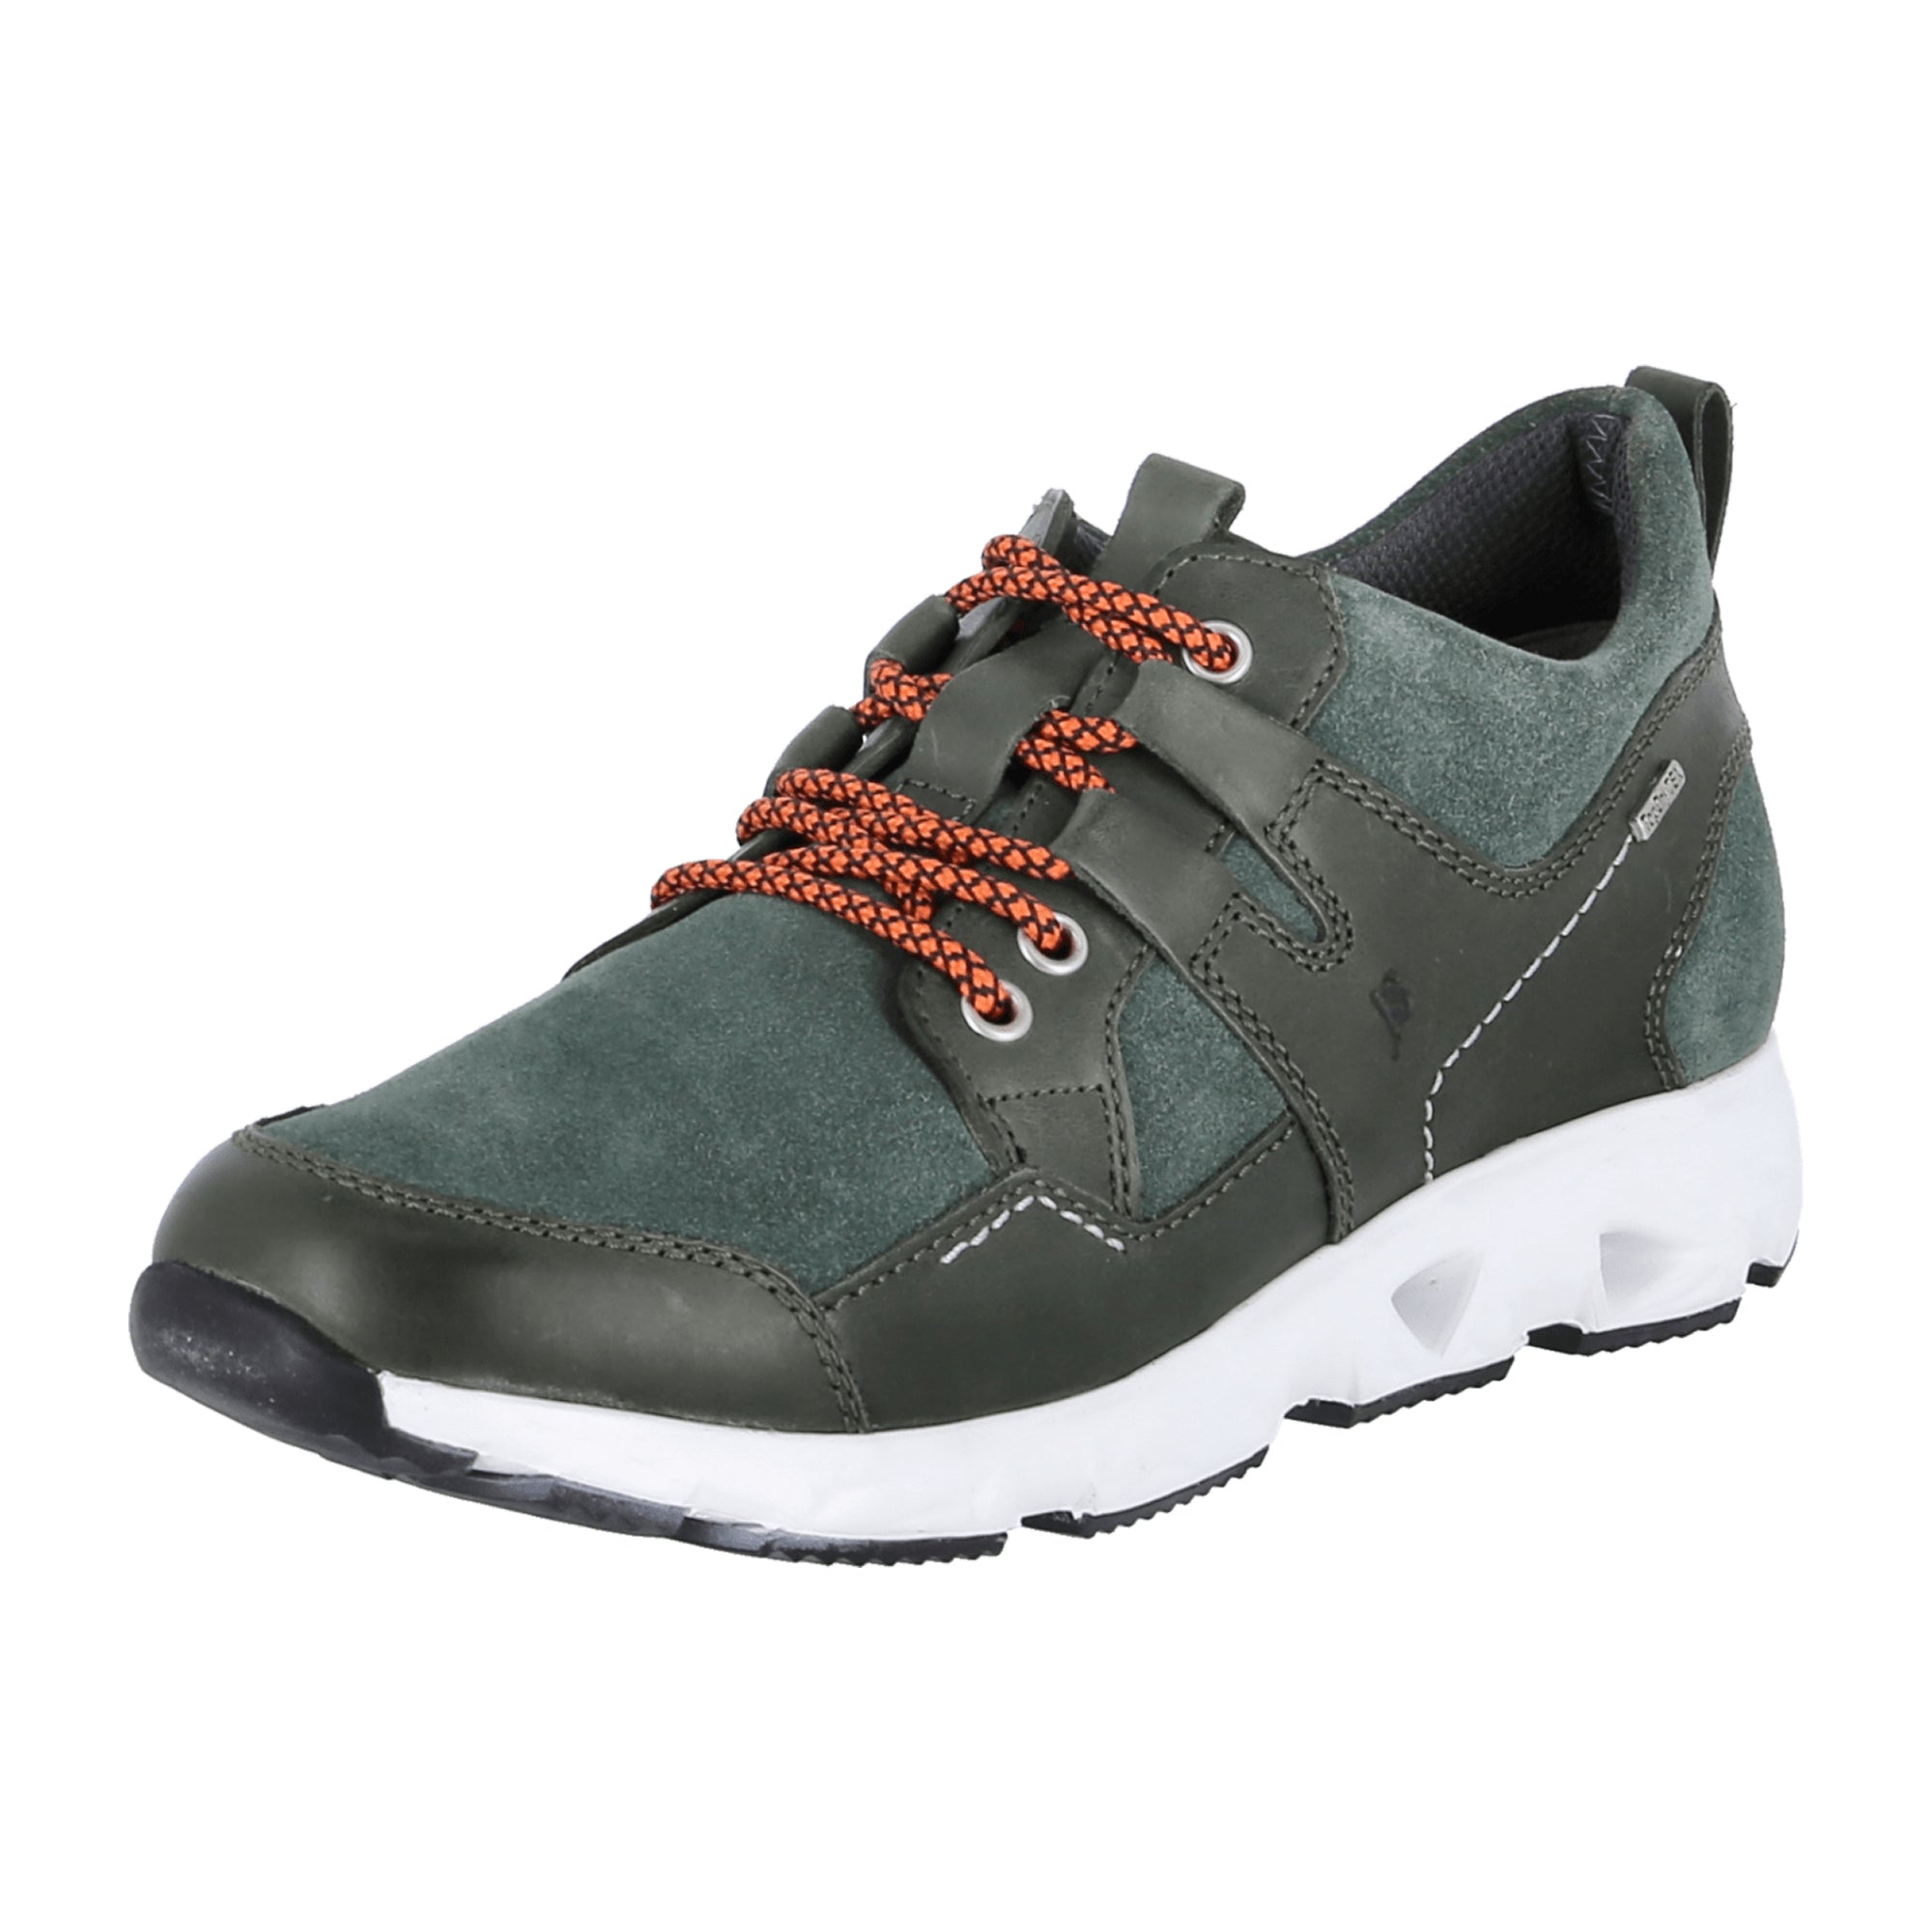 Comfortable Lace-up Shoes for Men in Grey by Josef Seibel